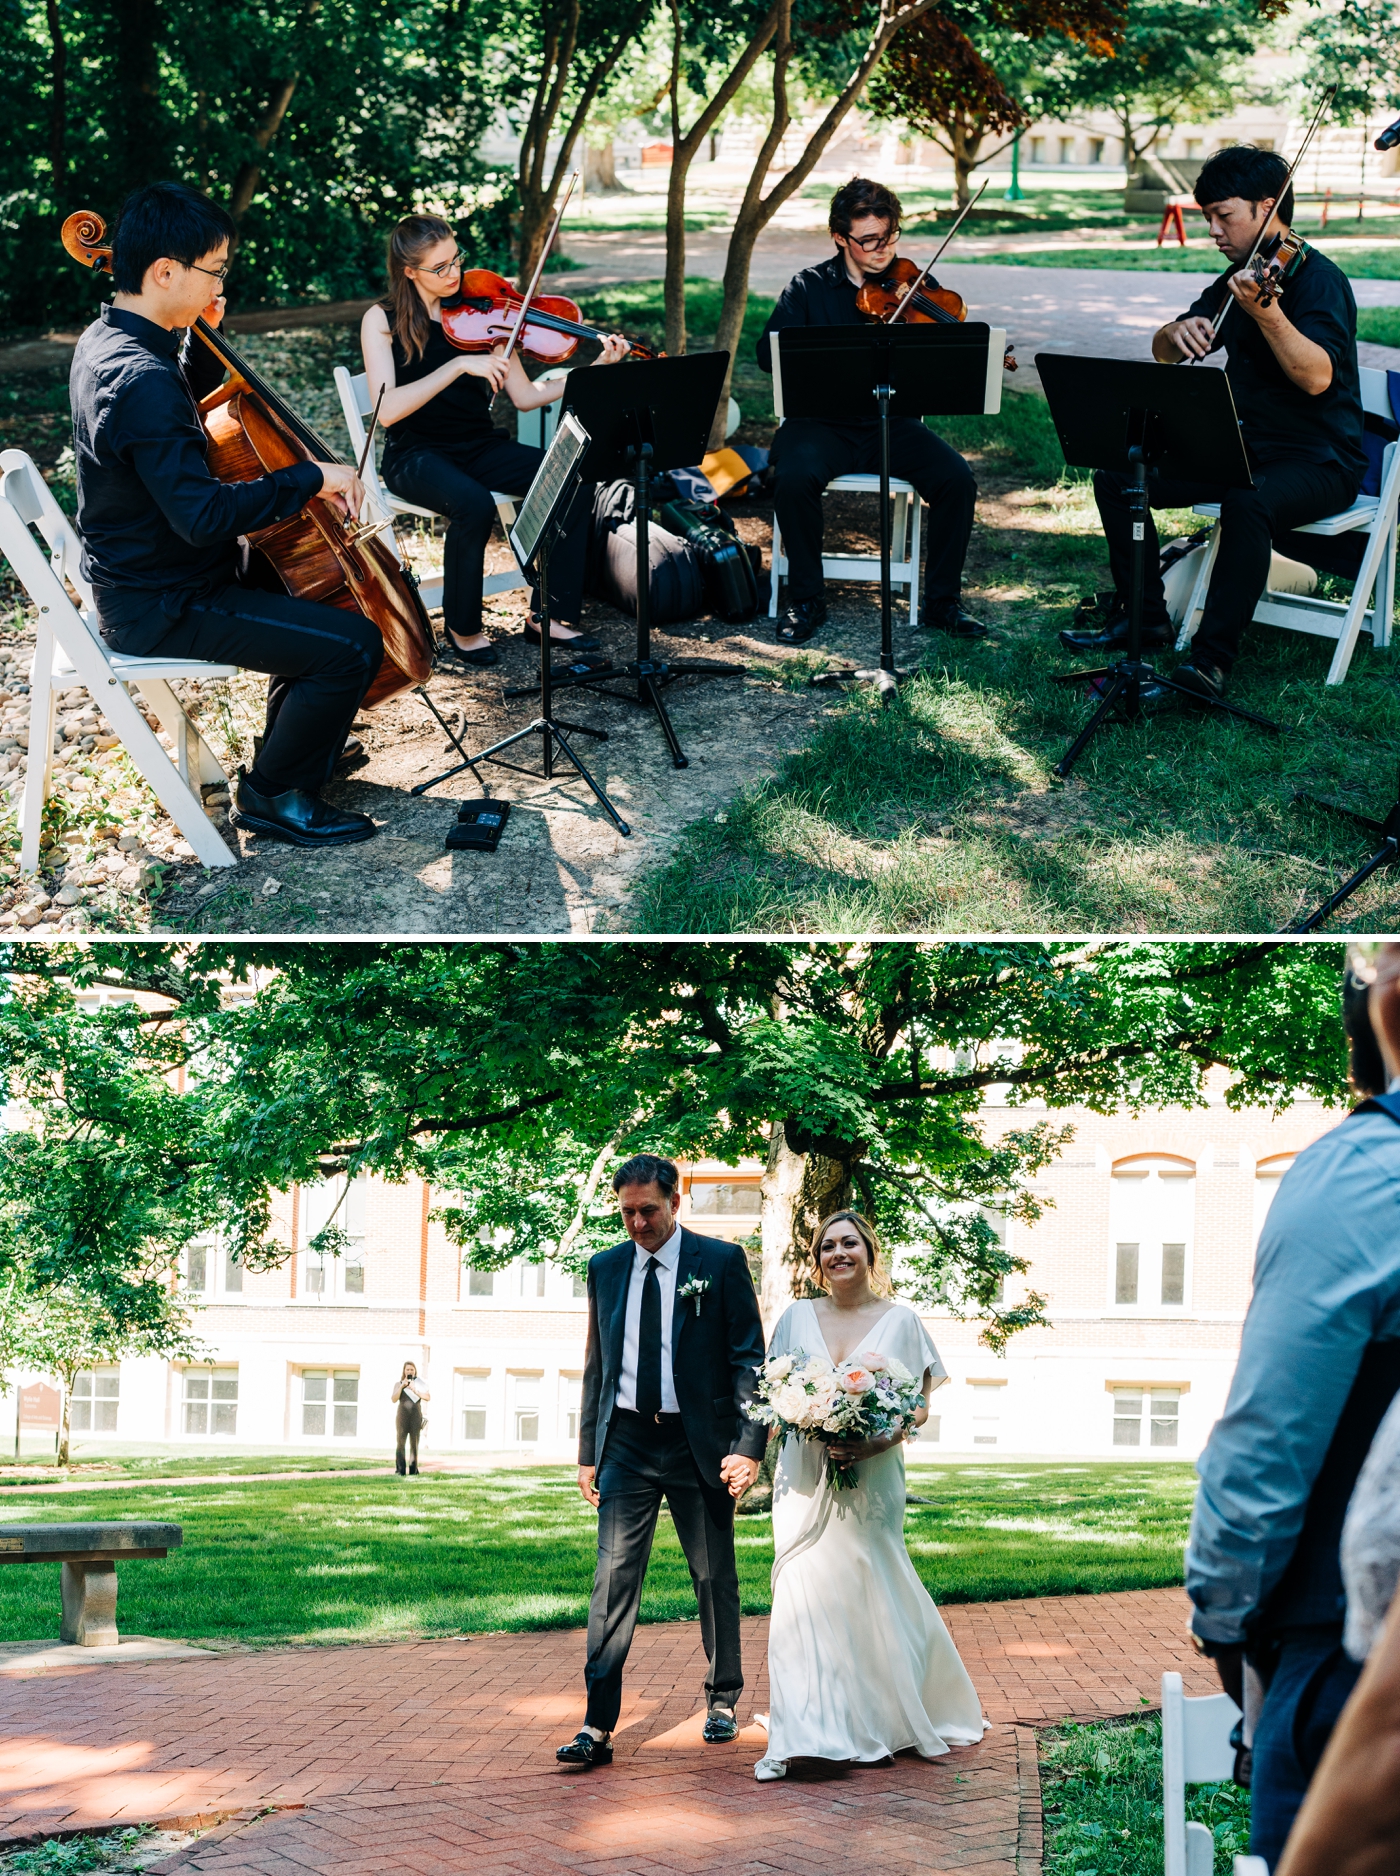 Outdoor wedding ceremony with live musicians as father walks the bride down the aisle